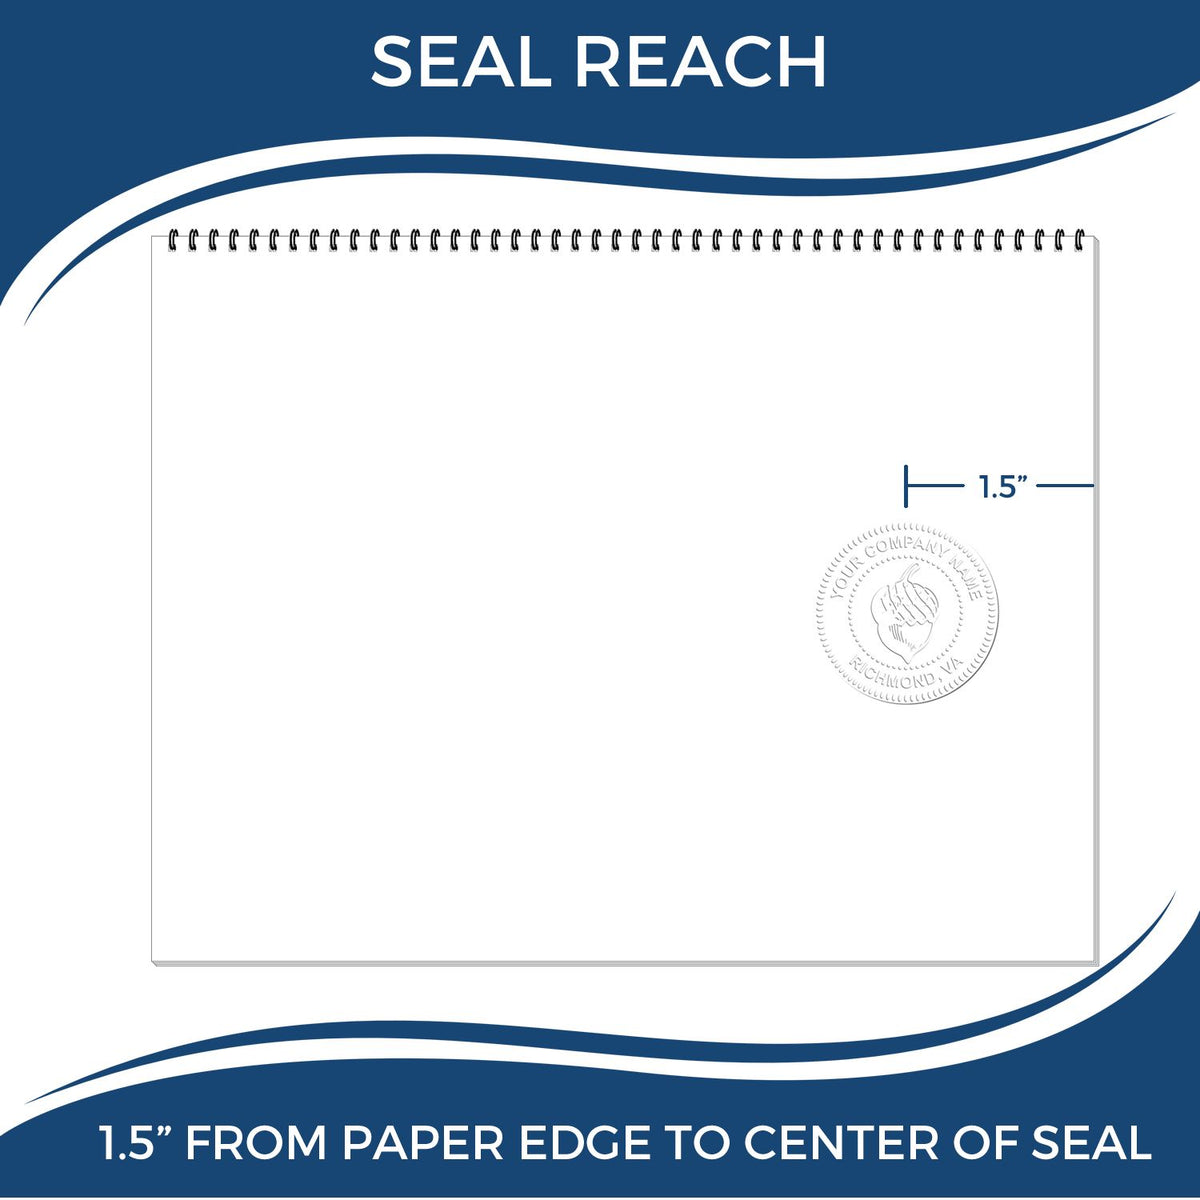 An infographic showing the seal reach which is represented by a ruler and a miniature seal image of the Nevada Geologist Desk Seal